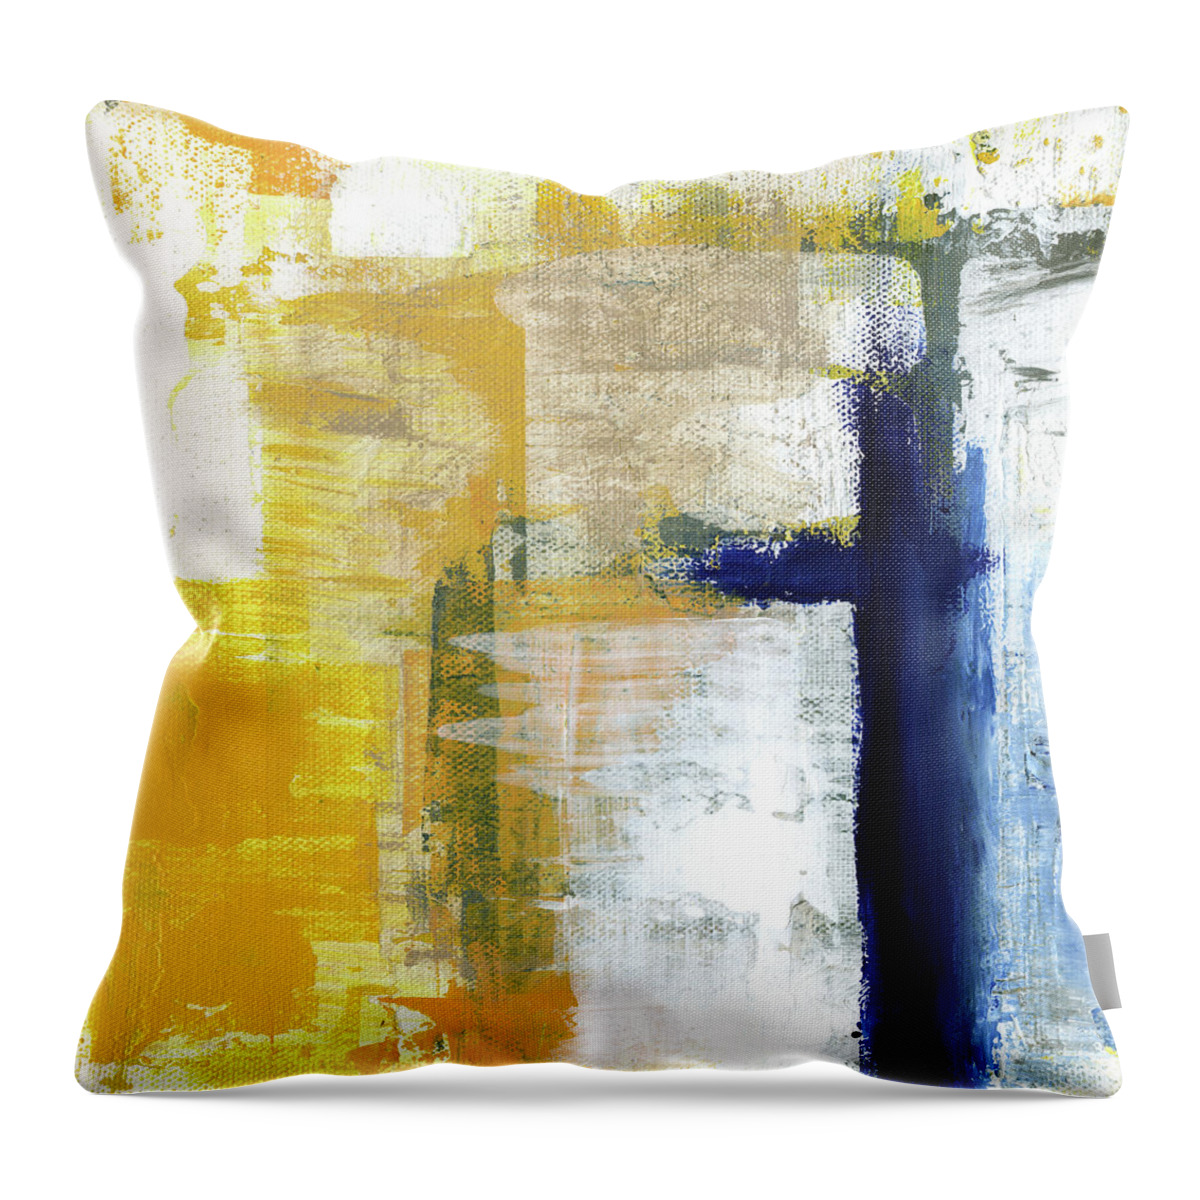 Abstract Throw Pillow featuring the painting Light Of Day 3 by Linda Woods